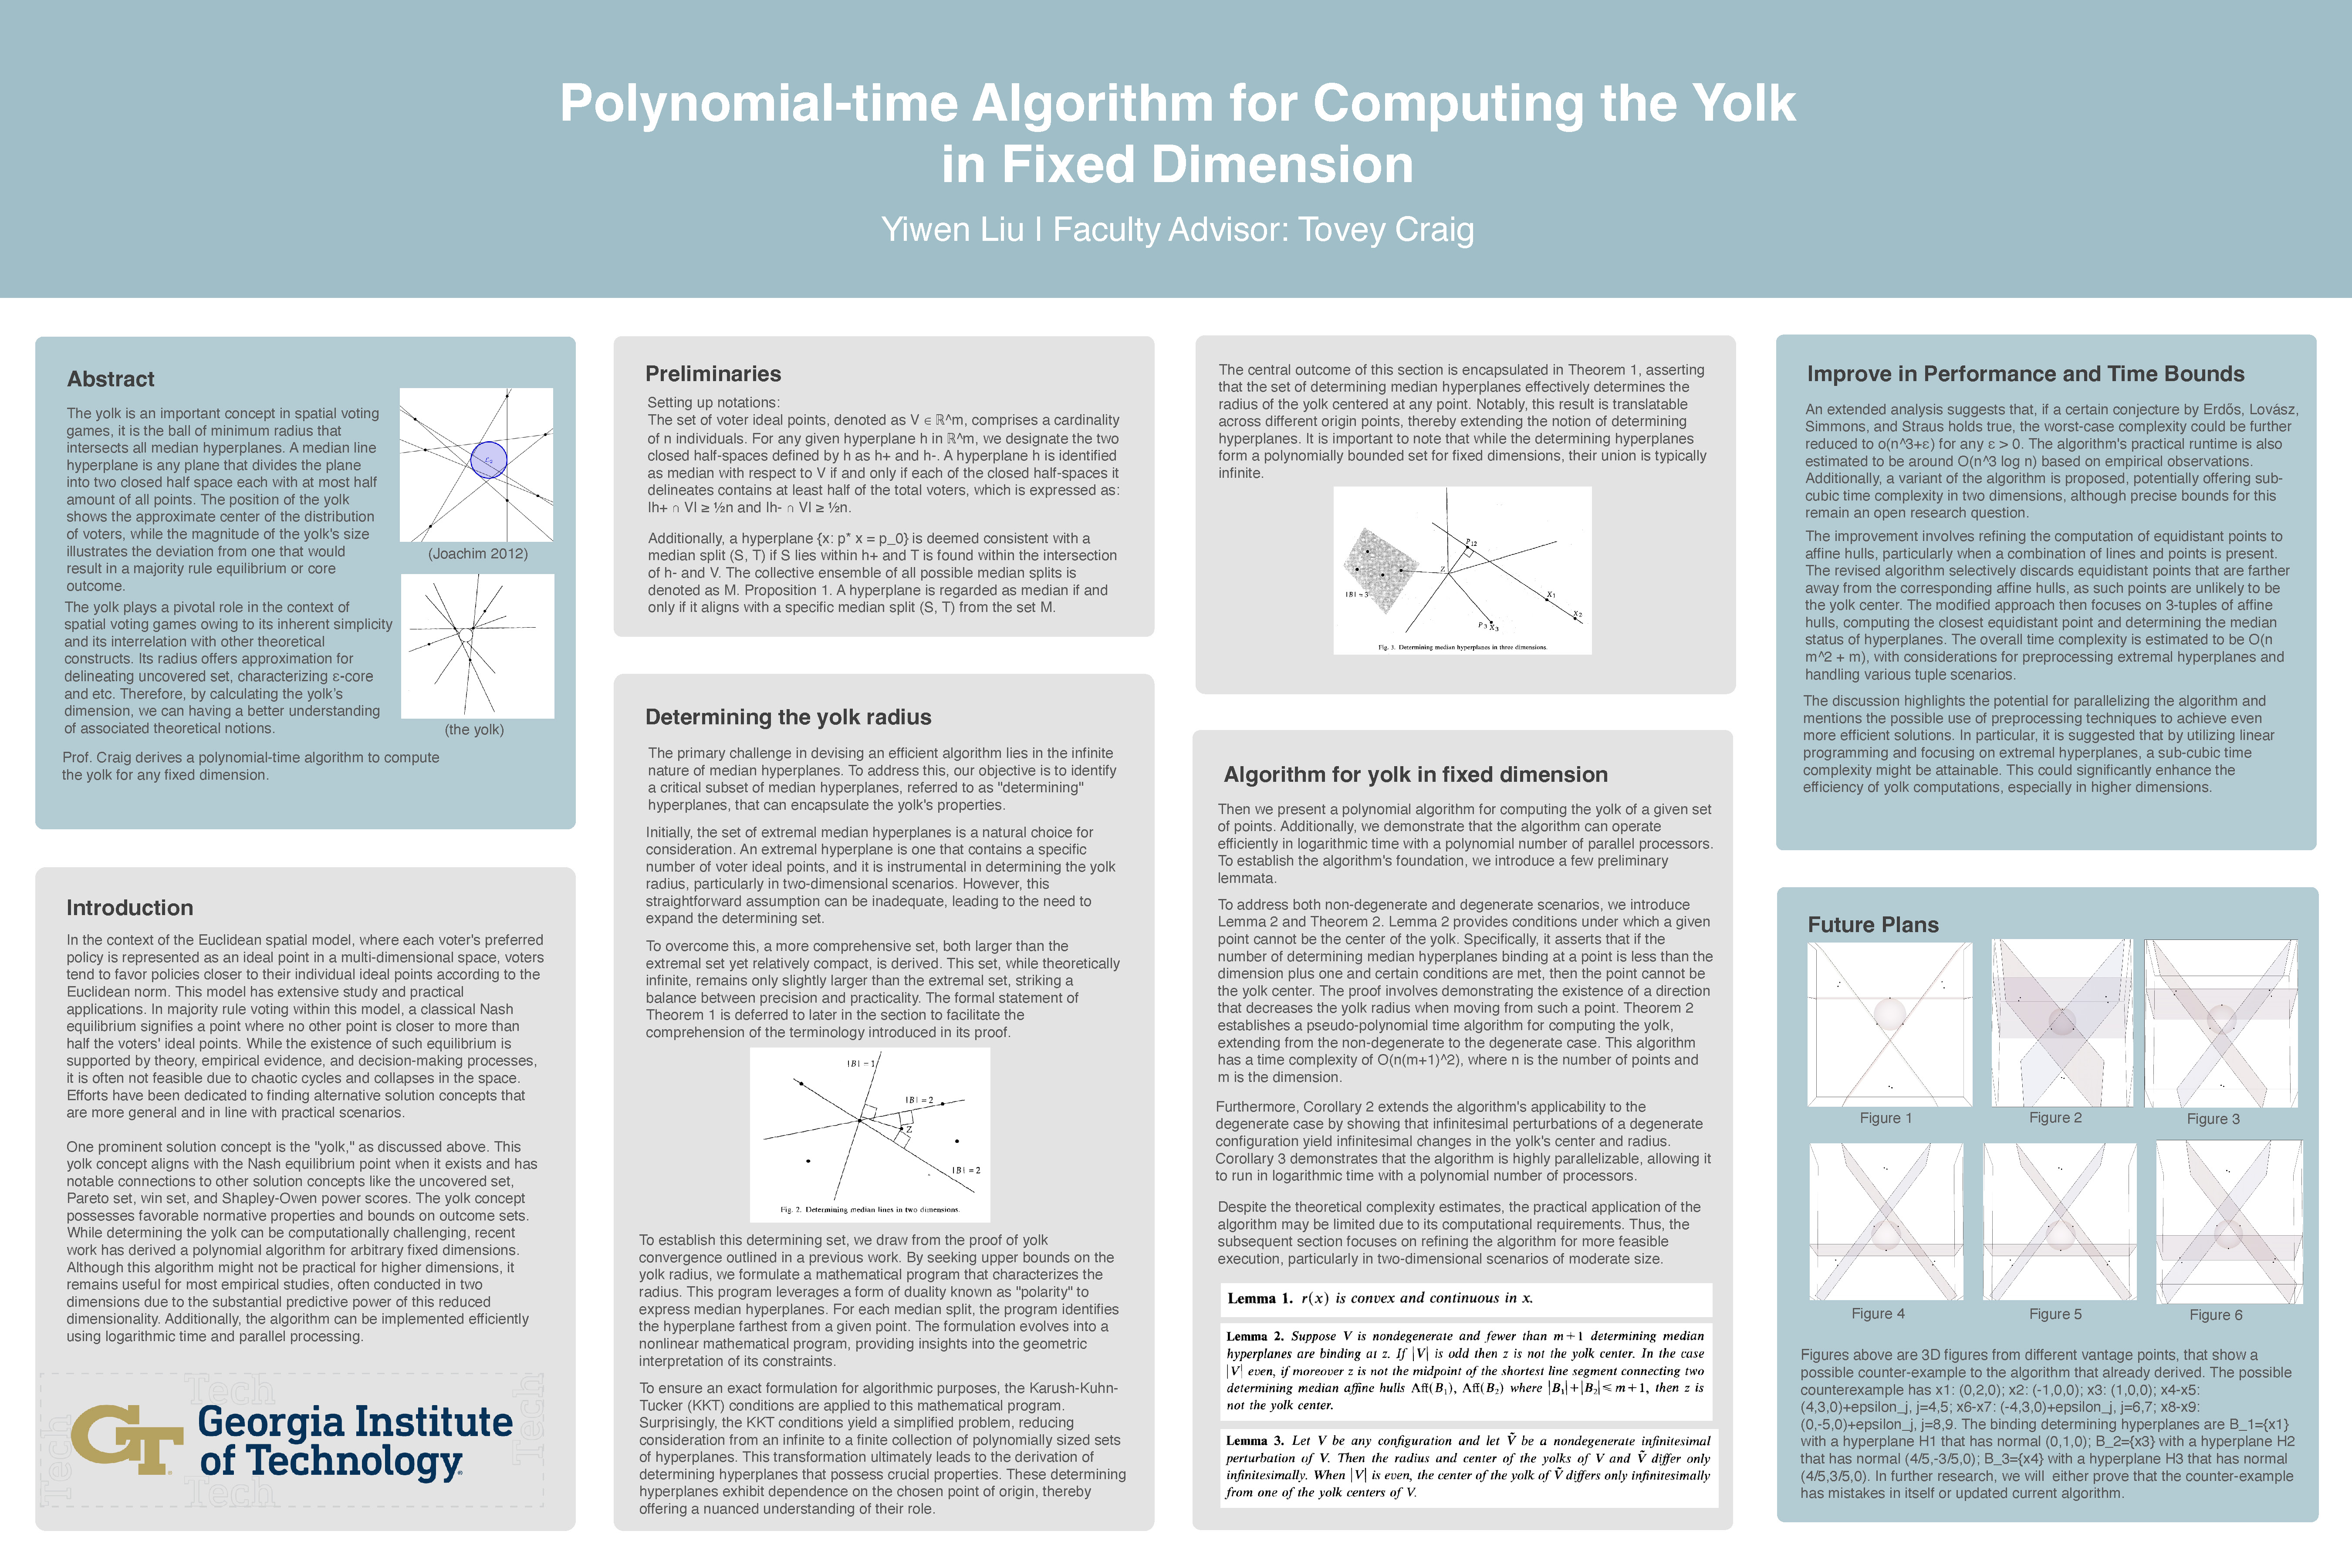 Polynomial-time Algorithm for Computing the Yolk in Fixed Dimension poster